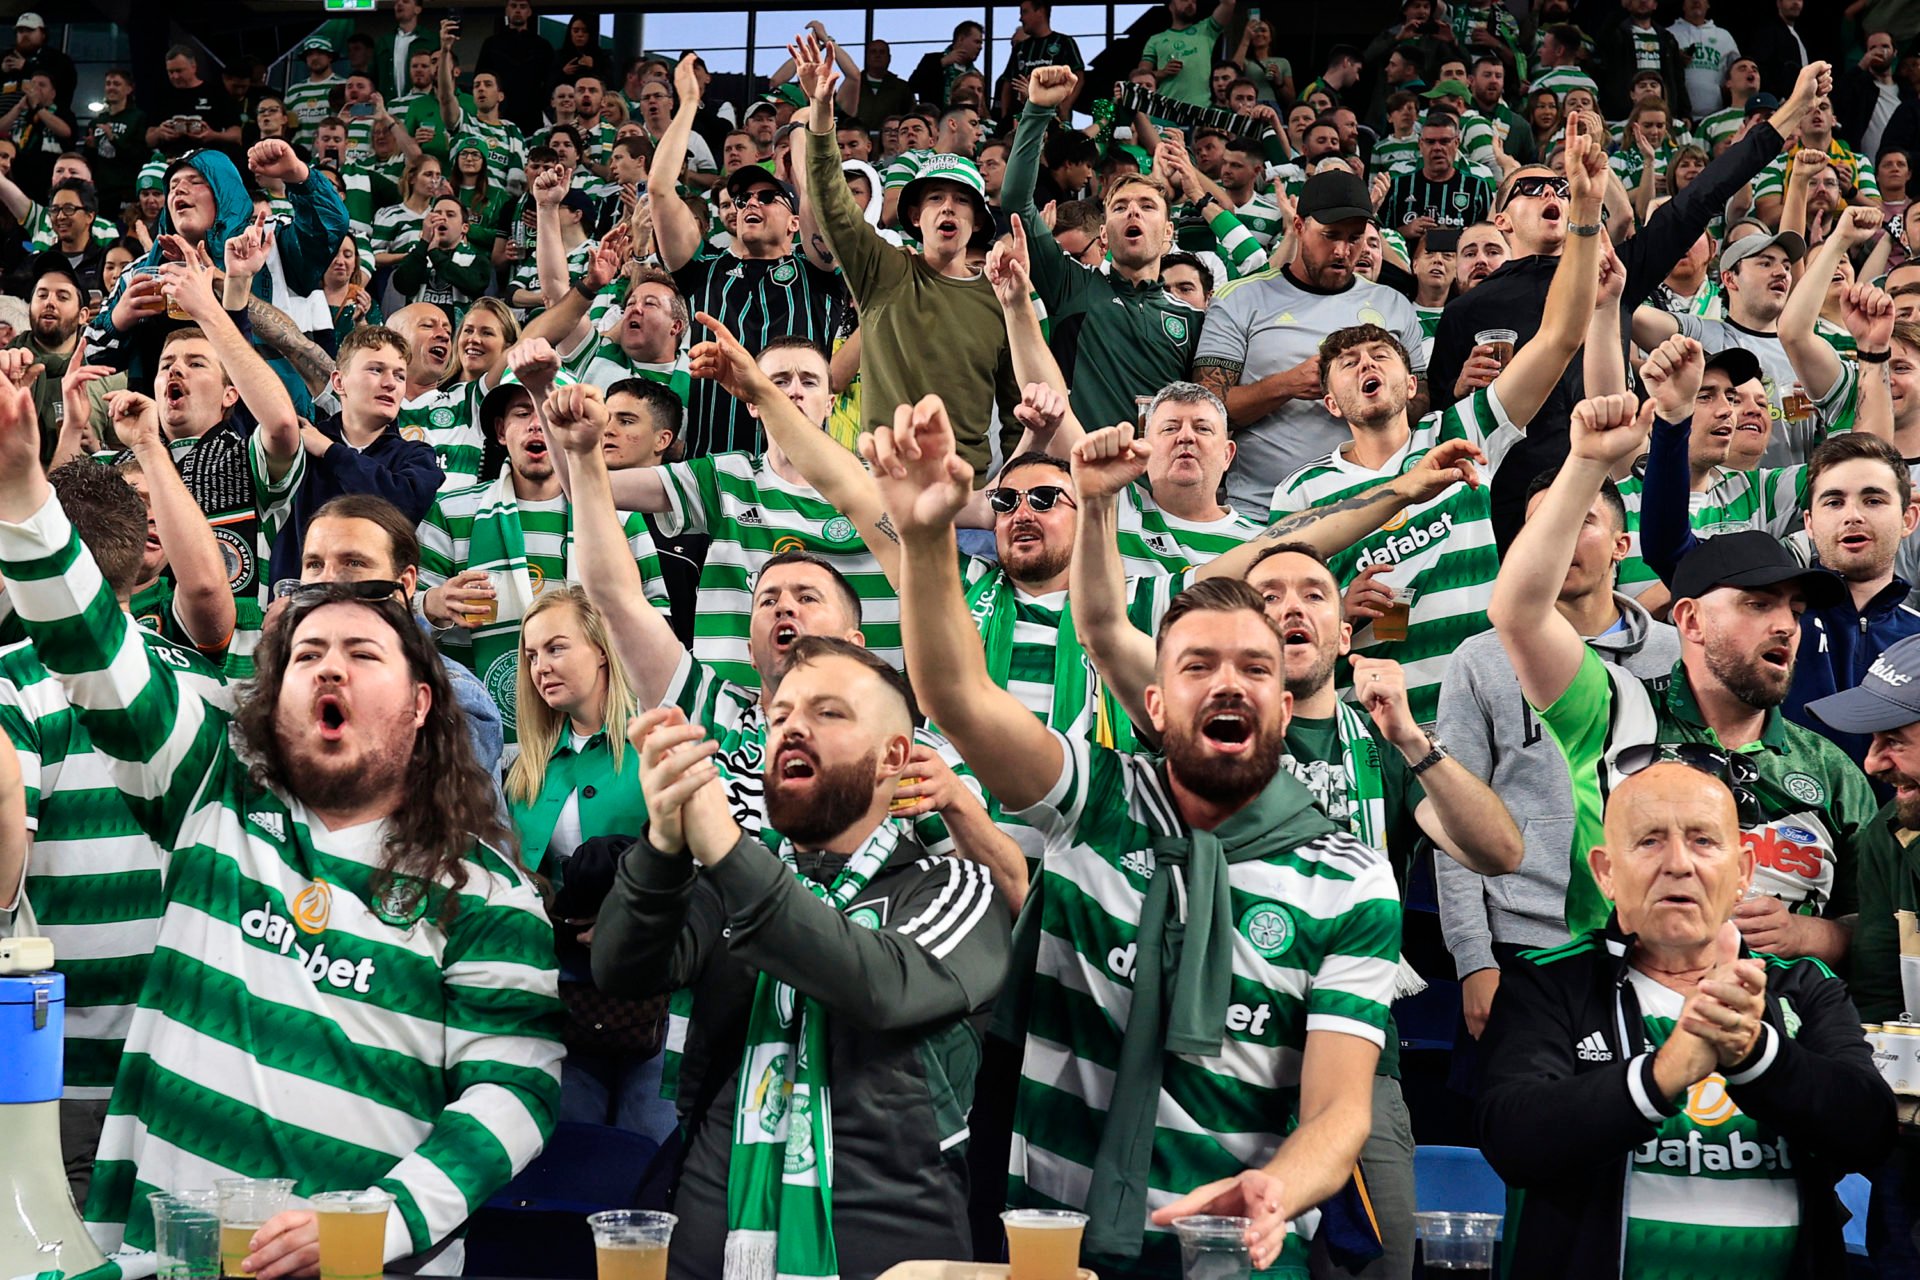 Over 1,000 Celtic supporters take over Sydney tourist spot as club